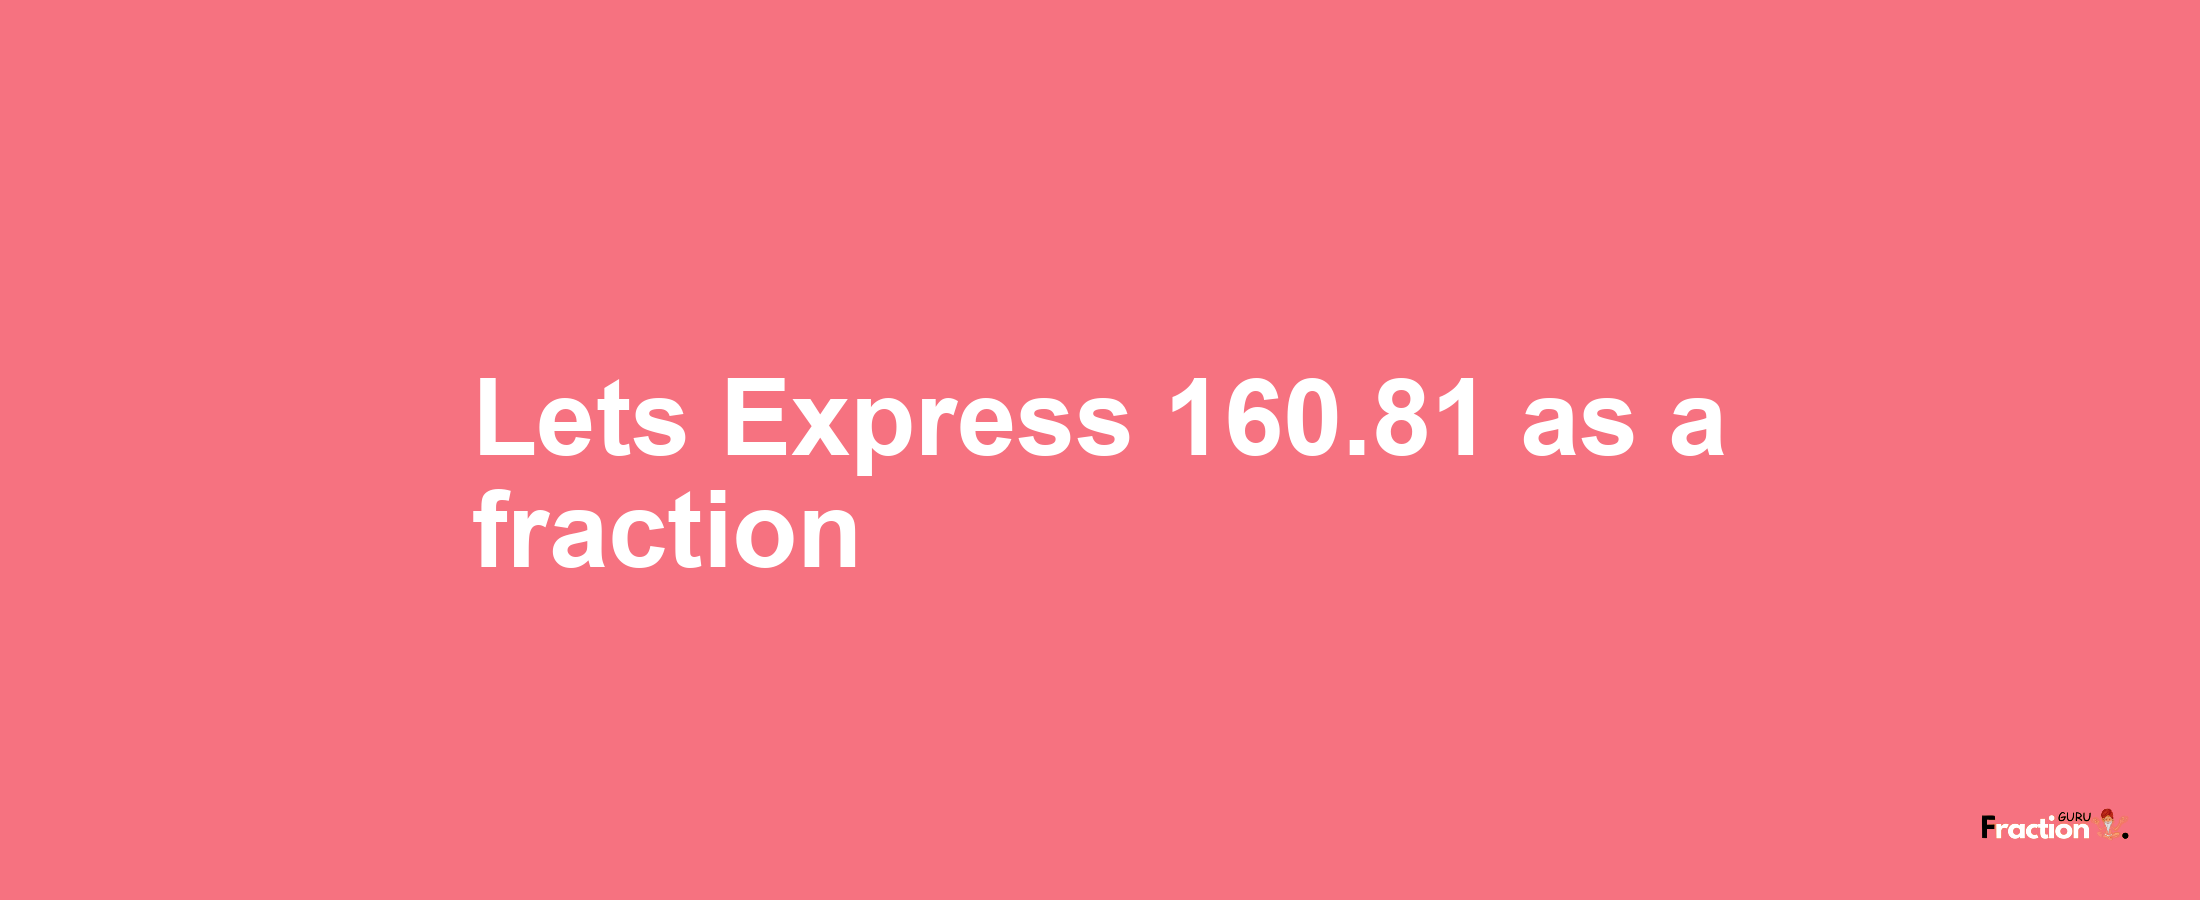 Lets Express 160.81 as afraction